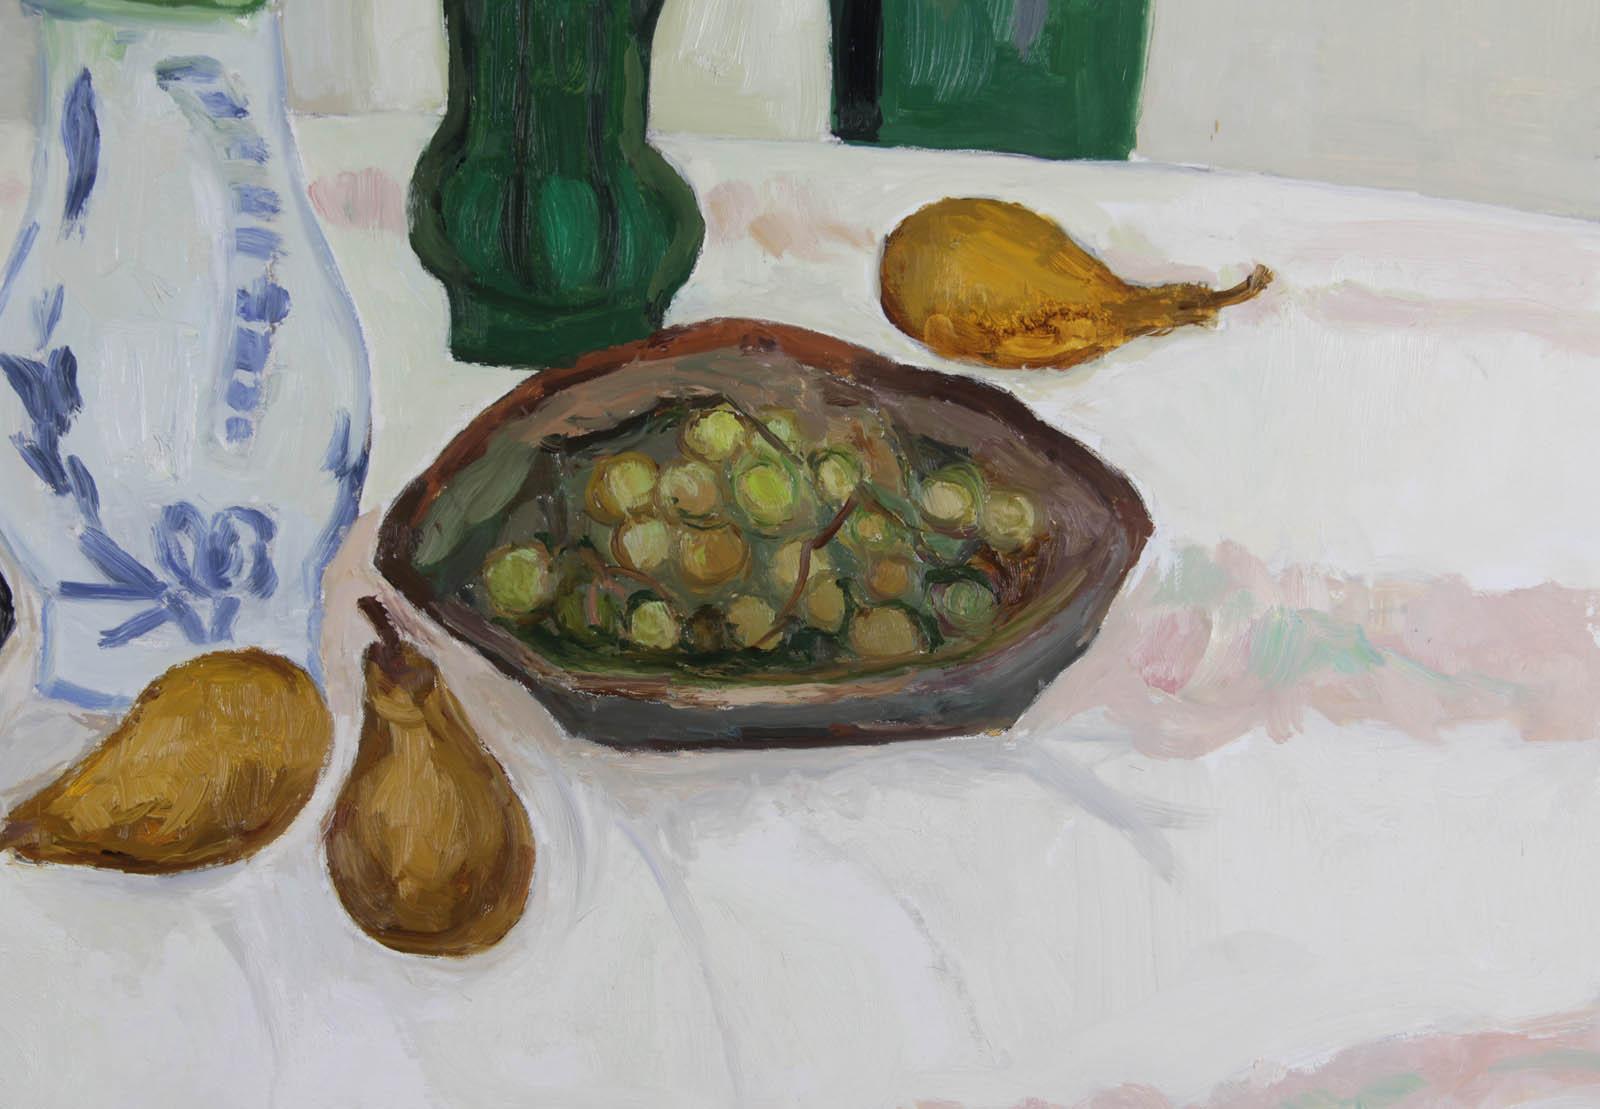 Arthur VAN HECKE (1924-2003)

Fruits, maïs et raisins
Oil on canvas
Size: 81 x 100cm
Signed lower right
Painting in perfect condition, sold unframed.

Origin:
- Artist's studio
- Marin Price Gallery, Washington, USA
- Findlay galleries, USA

Sold